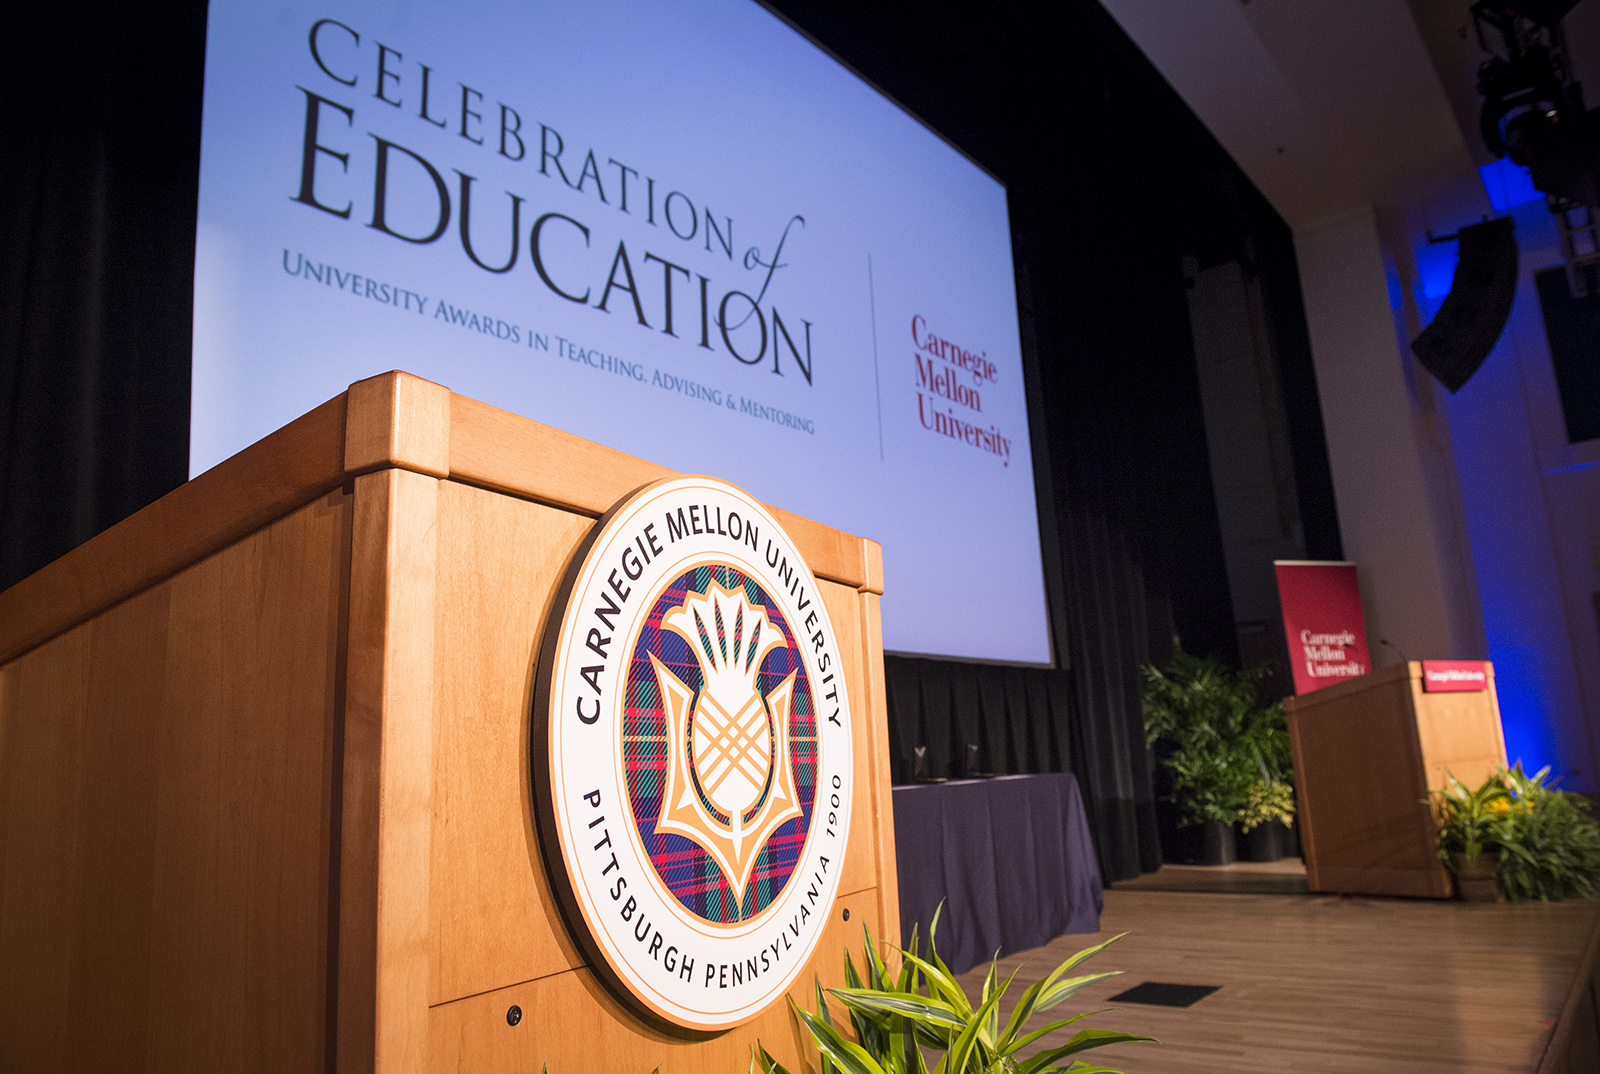 The stage during a previous Celebration of Education. A wooden podium with CMU logo is in the foreground, projector screen in the background